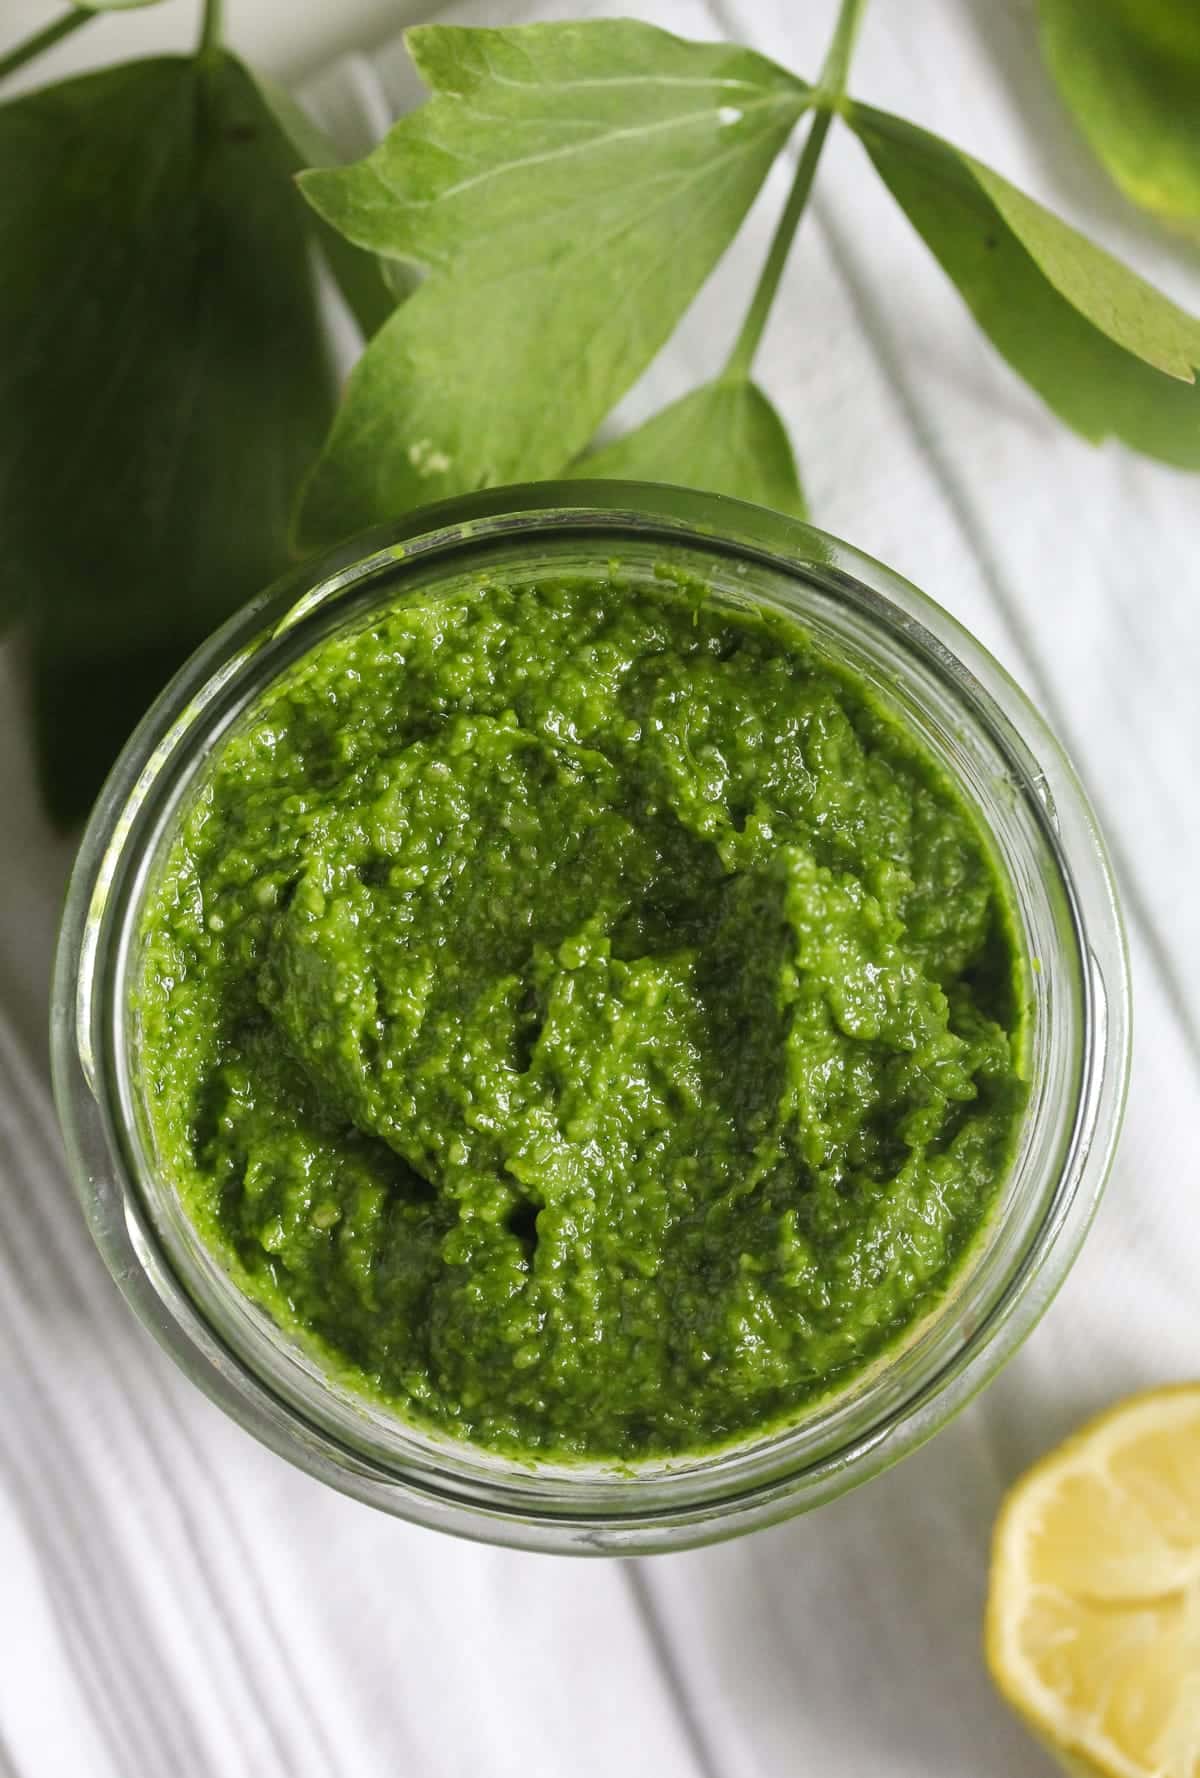 pesto in a jar, half a lemon and fresh lovage leaves on the table.